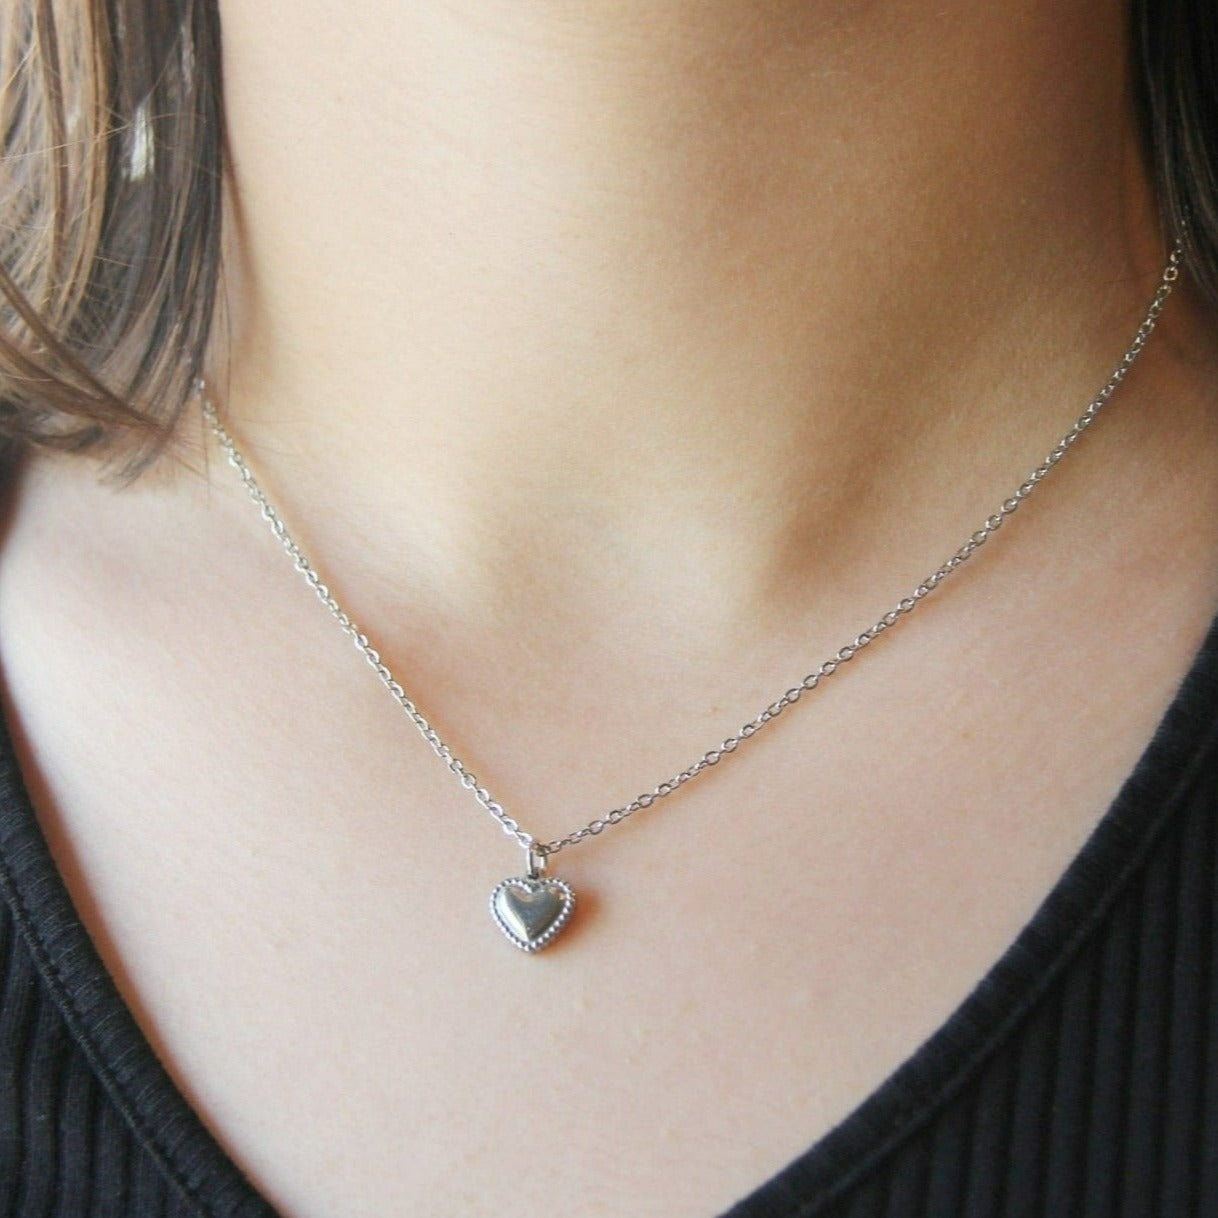 Tiny Oval Initial Necklace in Sterling Silver - Michelle Chang